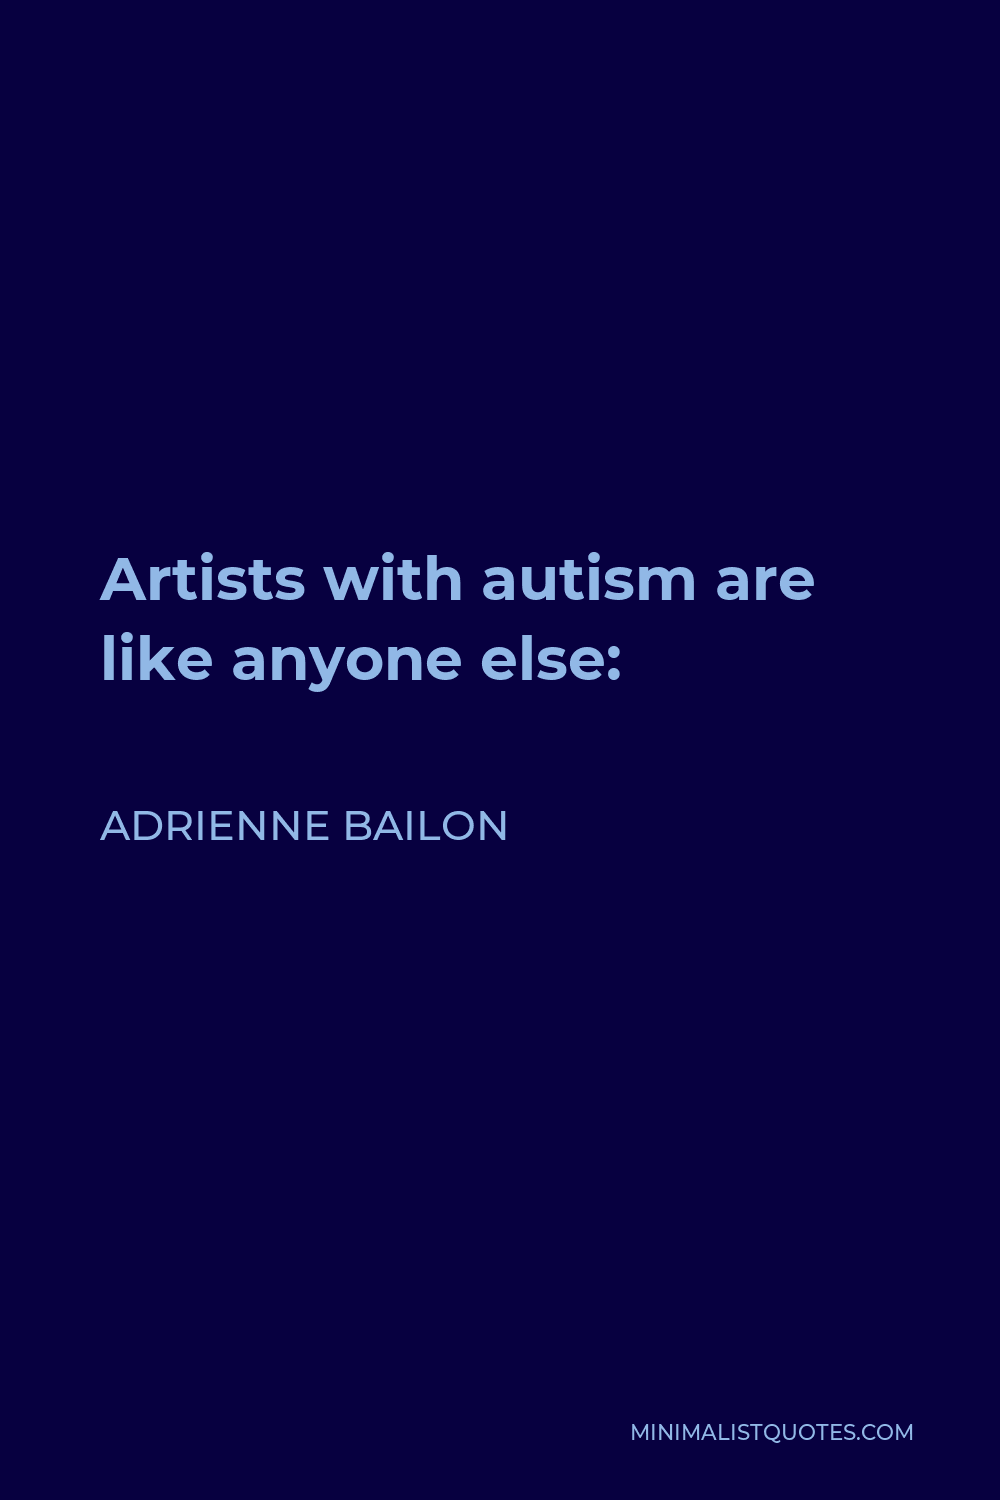 Adrienne Bailon Quote - Artists with autism are like anyone else: